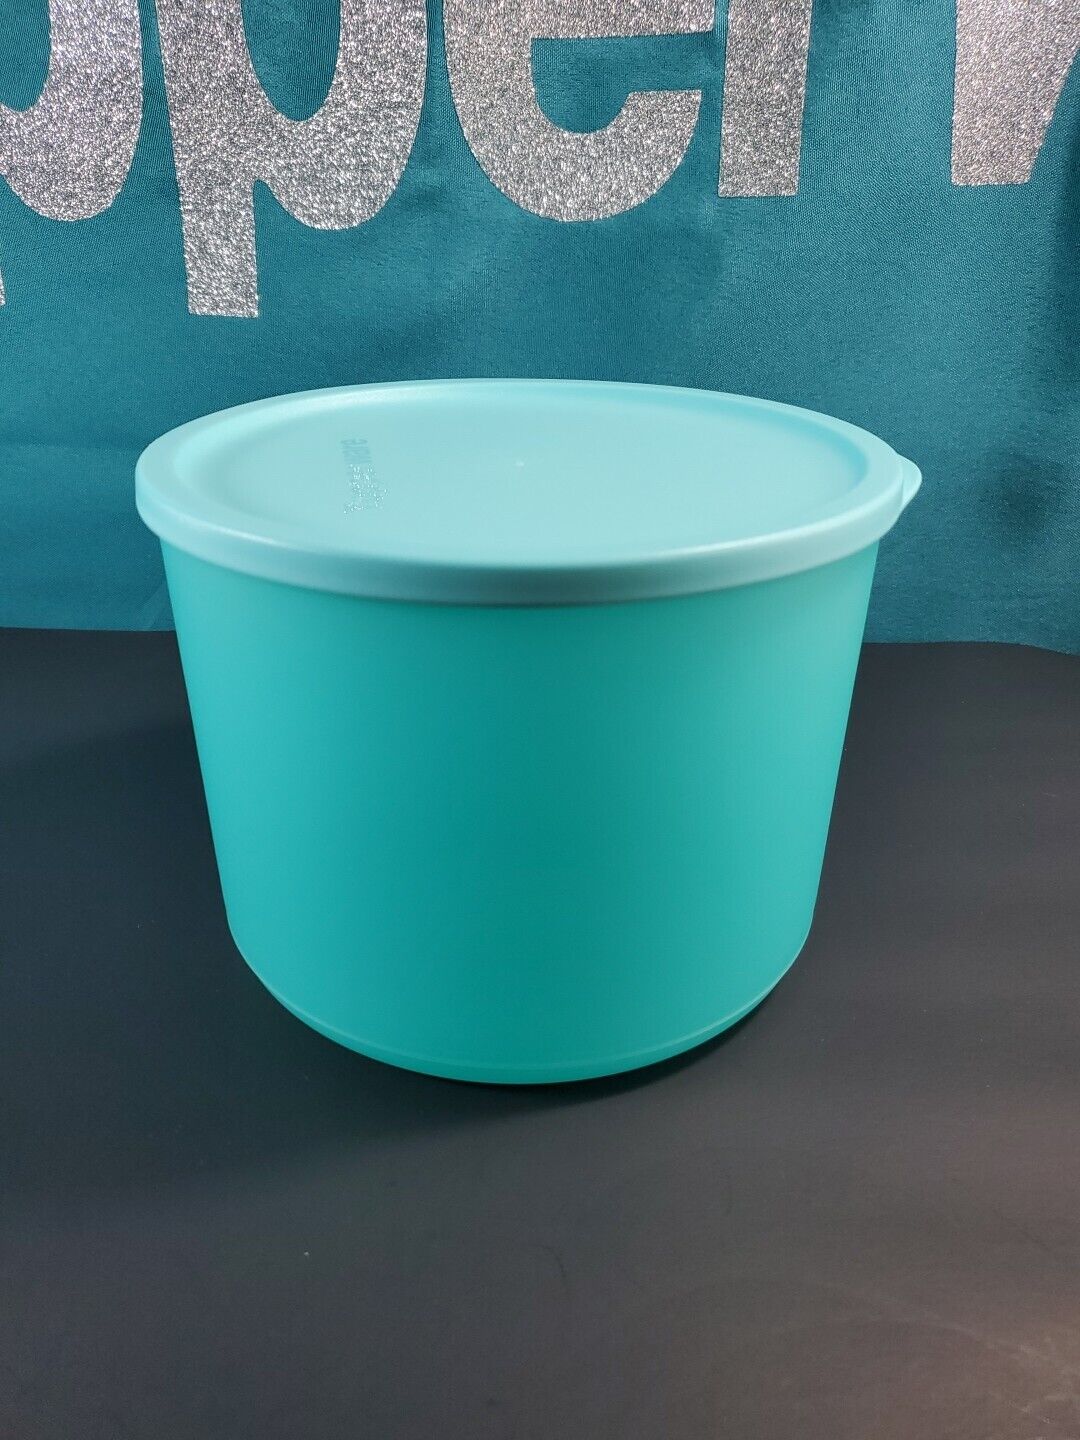 Tupperware Basic Bright Round Container Storage 9 Cup Cubix Ice Cream Mint Green